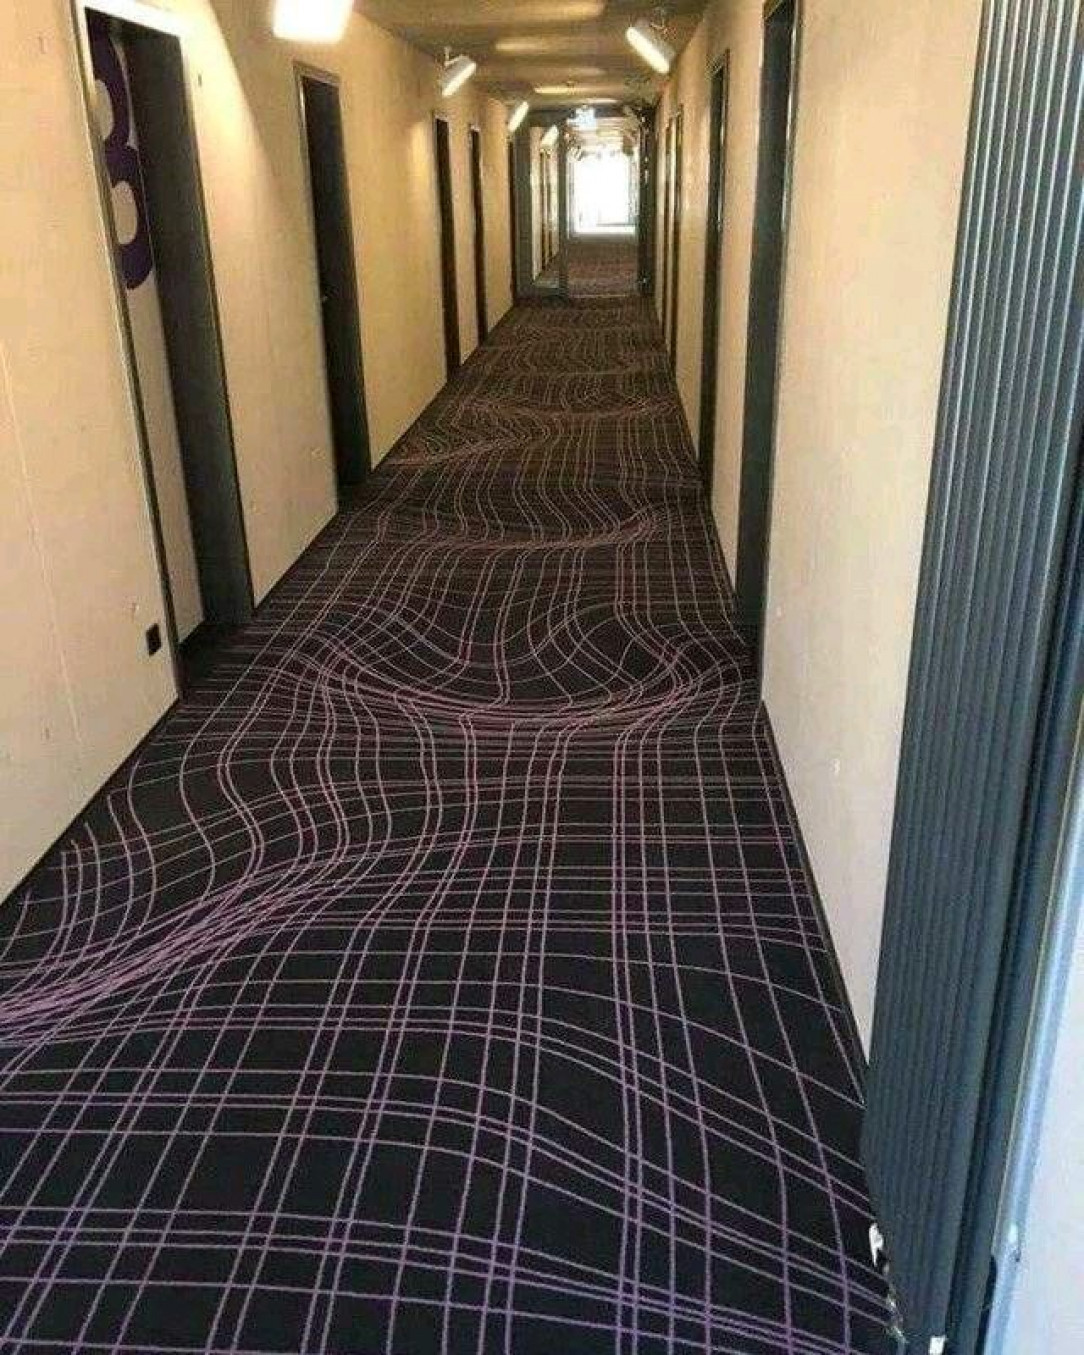 A hotel in Germany uses 3D carpets to prevent guests from running in the passage